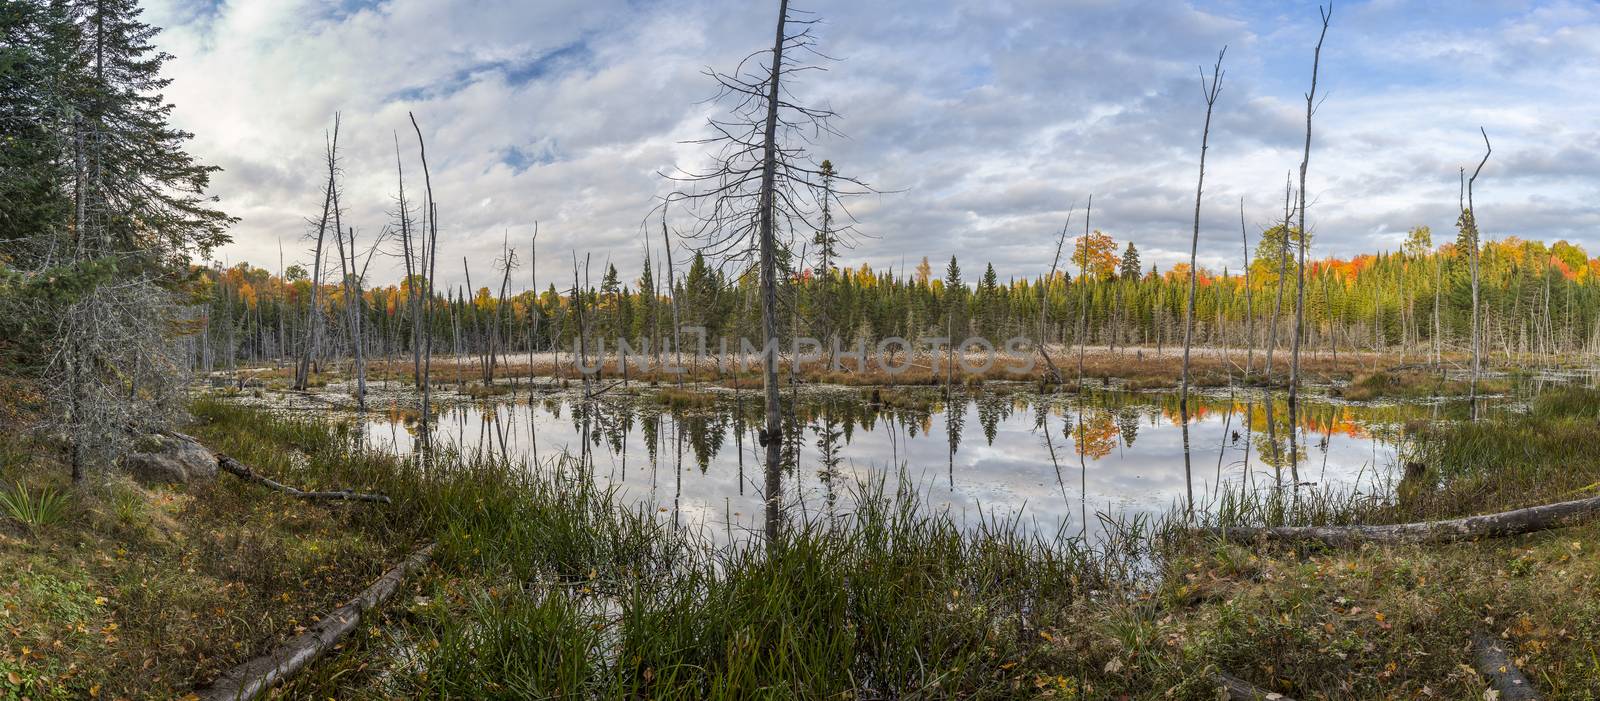 Beaver Pond in Autumn - Ontario, Canada by gonepaddling